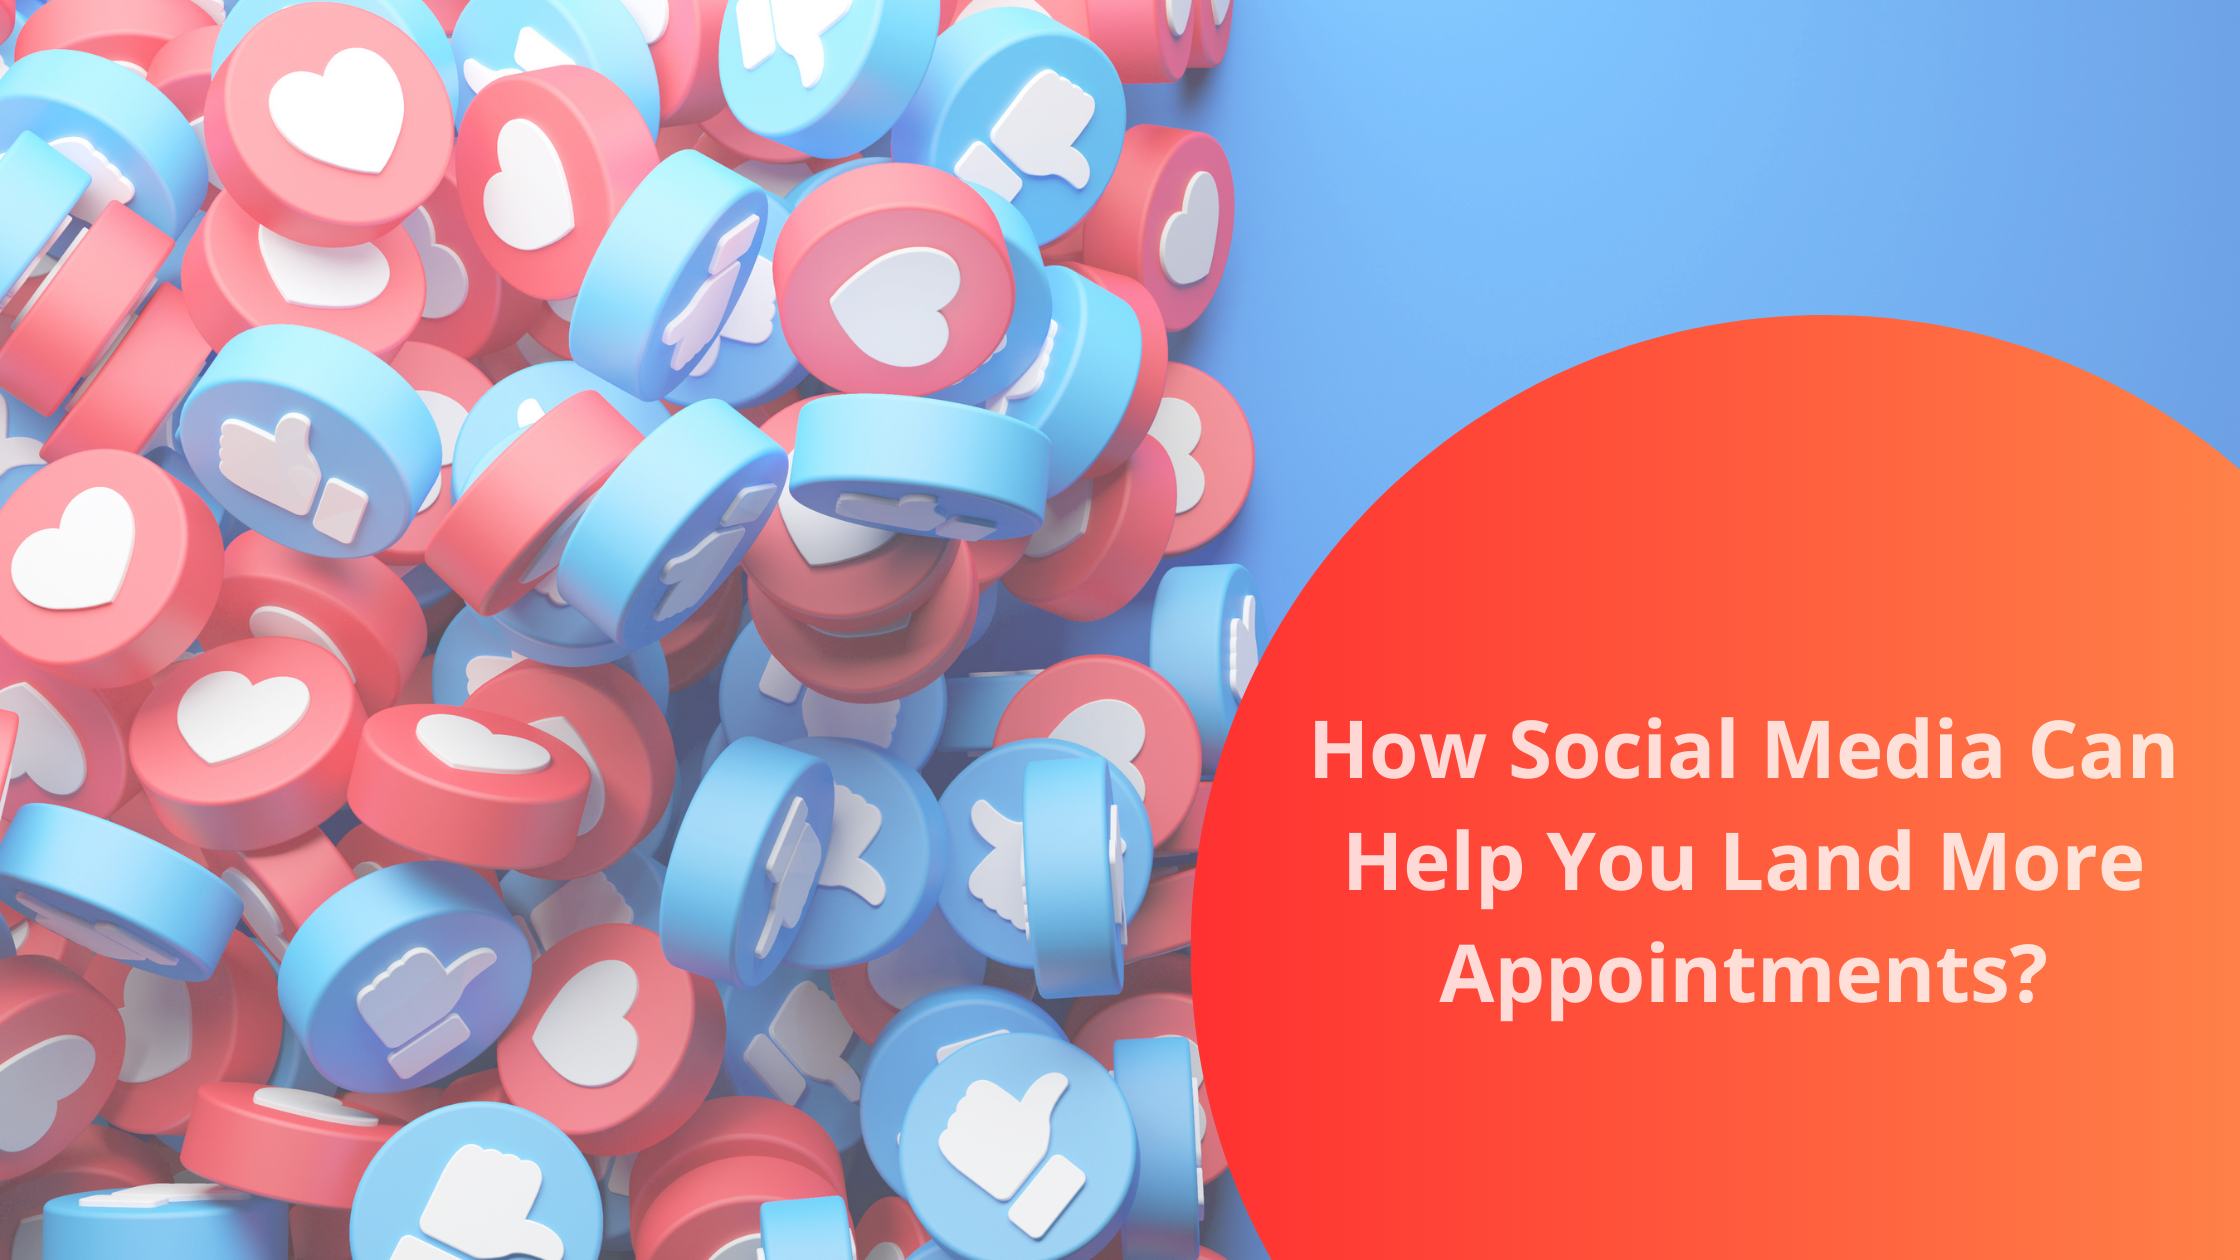 8 tips to land more appointments through social media | bookafy